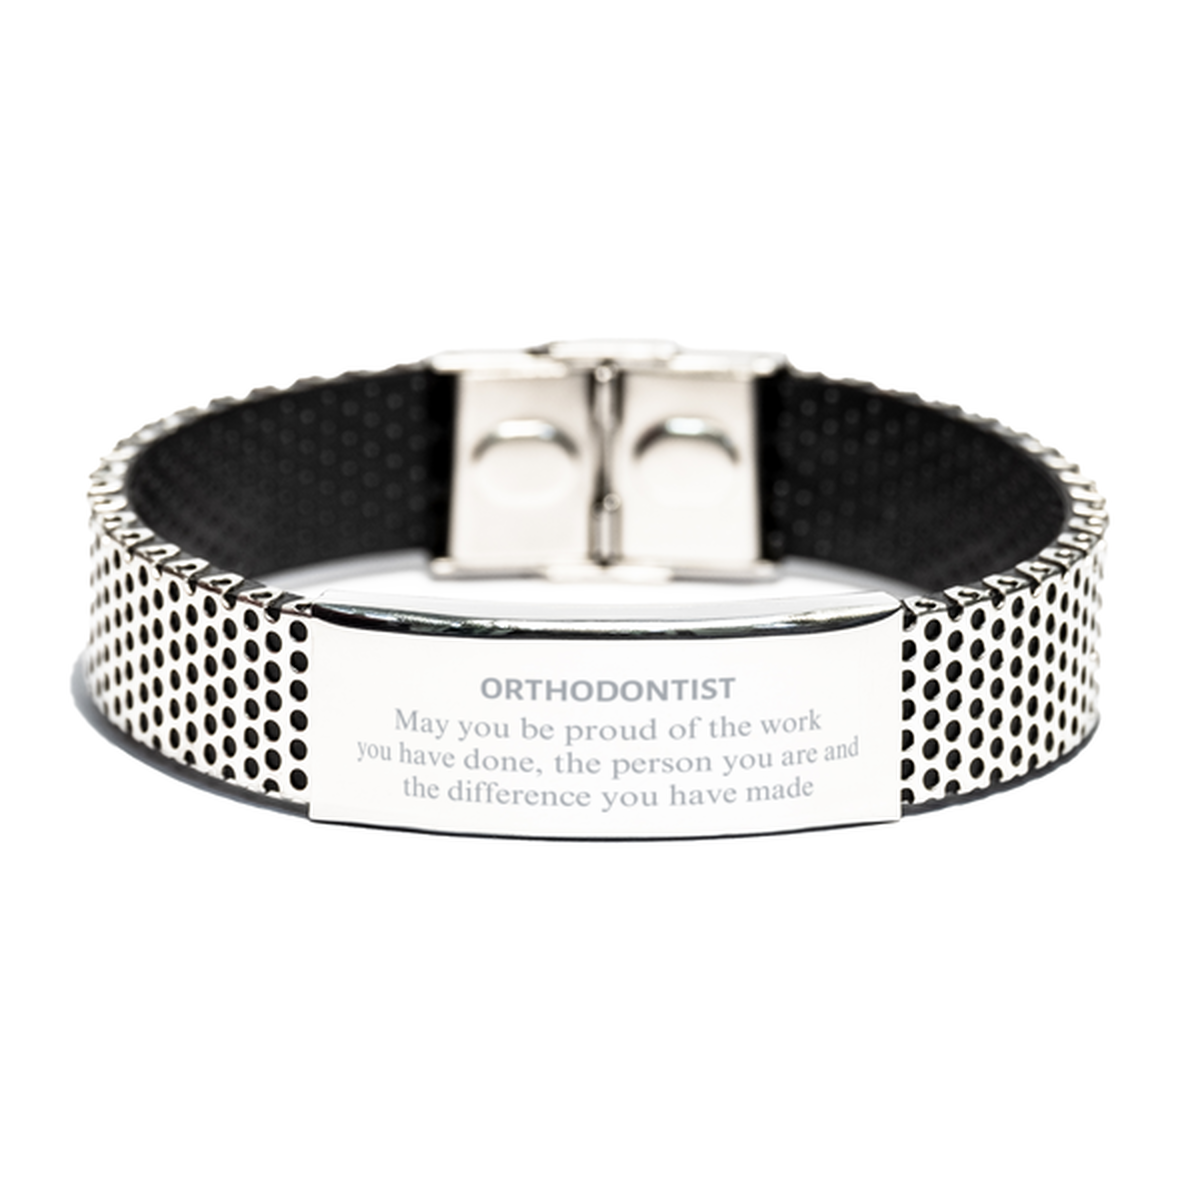 Orthodontist May you be proud of the work you have done, Retirement Orthodontist Stainless Steel Bracelet for Colleague Appreciation Gifts Amazing for Orthodontist